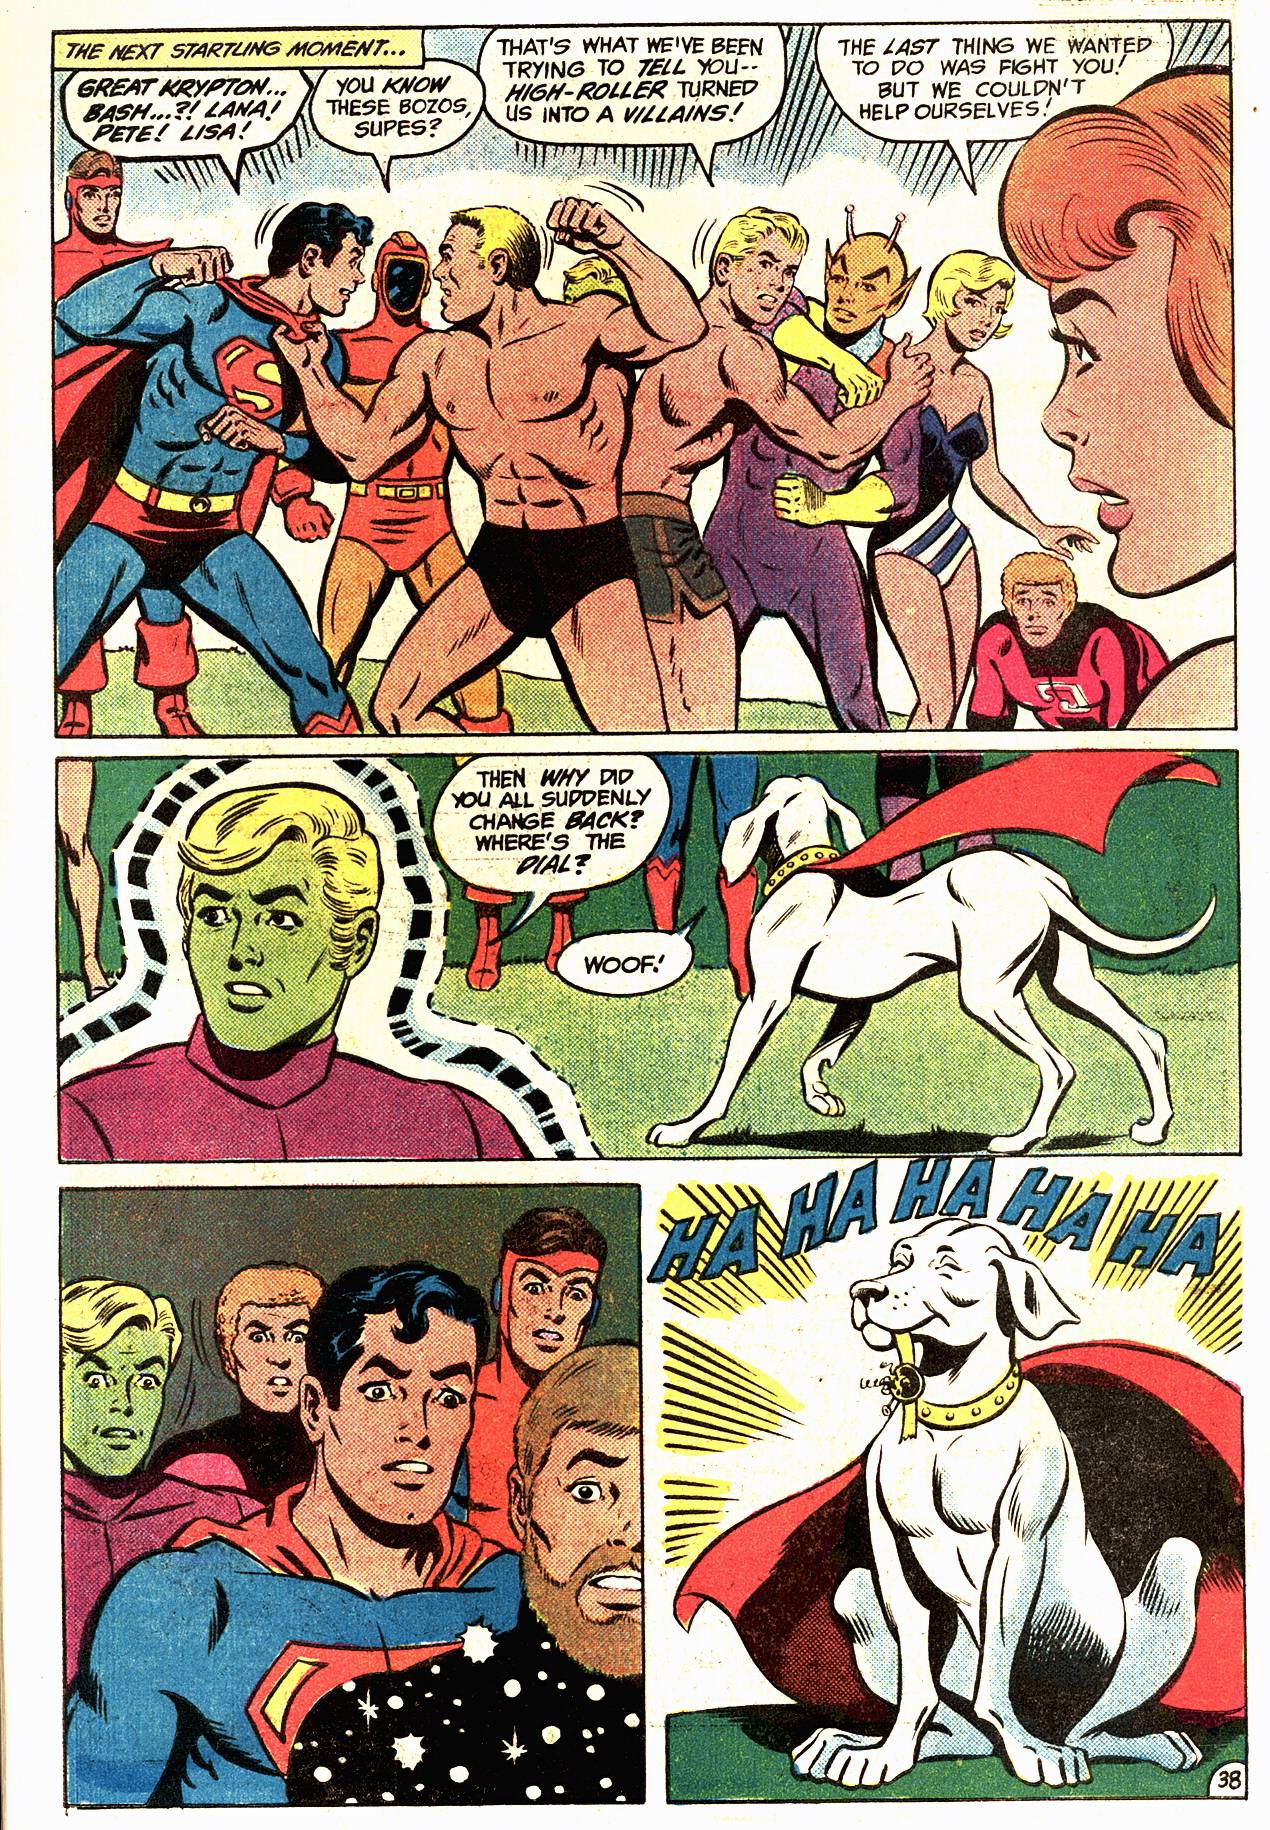 The New Adventures of Superboy 50 Page 38